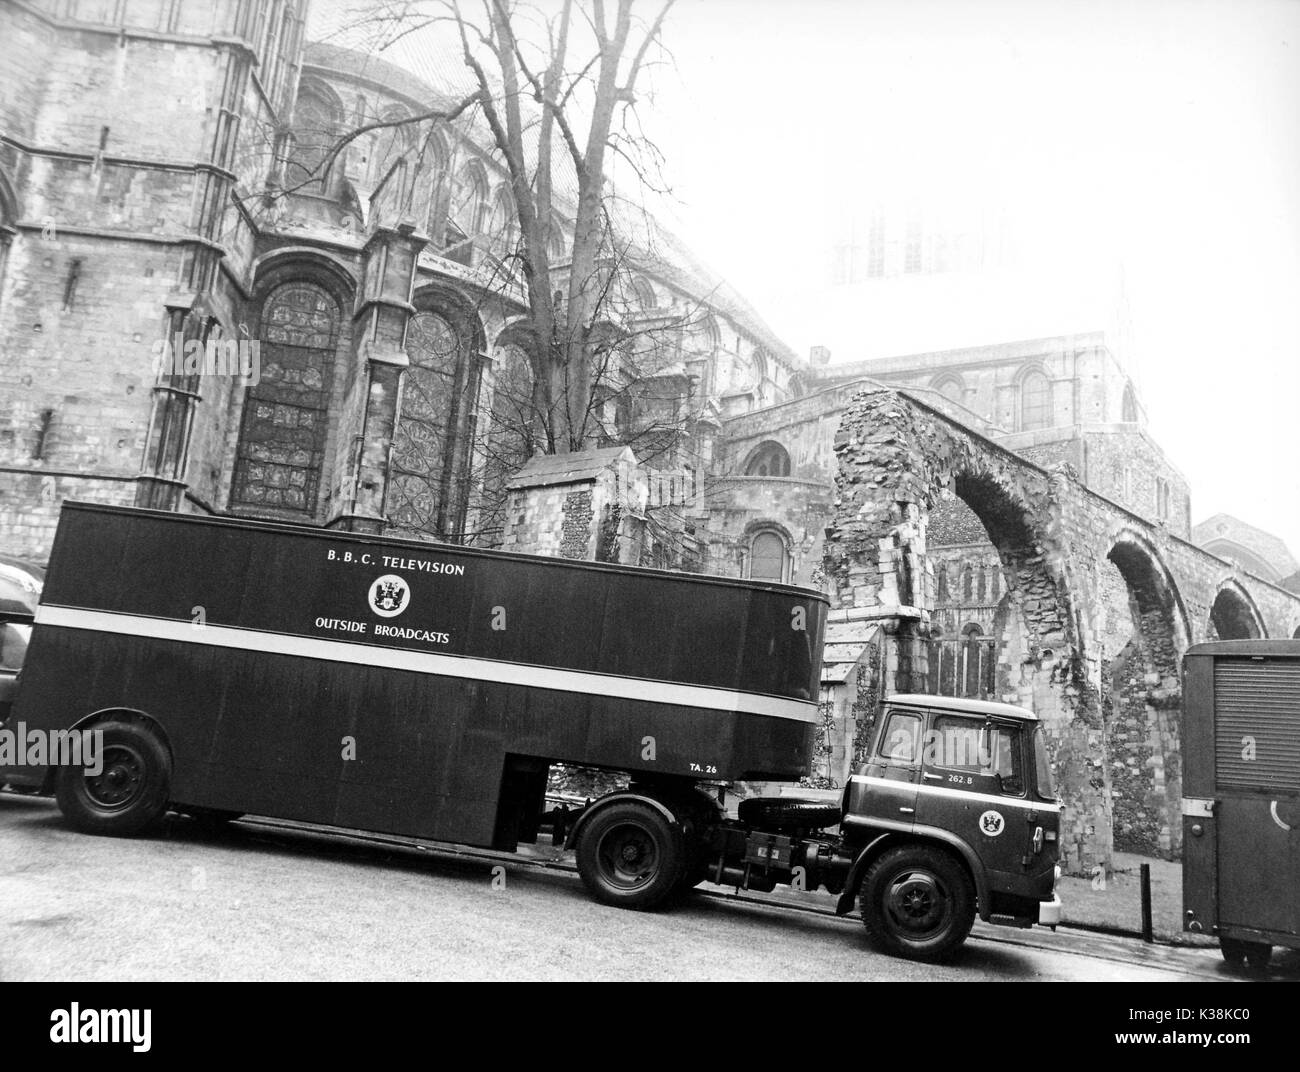 BBC OUTSIDE BROADCAST VAN OUTSIDE A CATHEDRAL Stock Photo